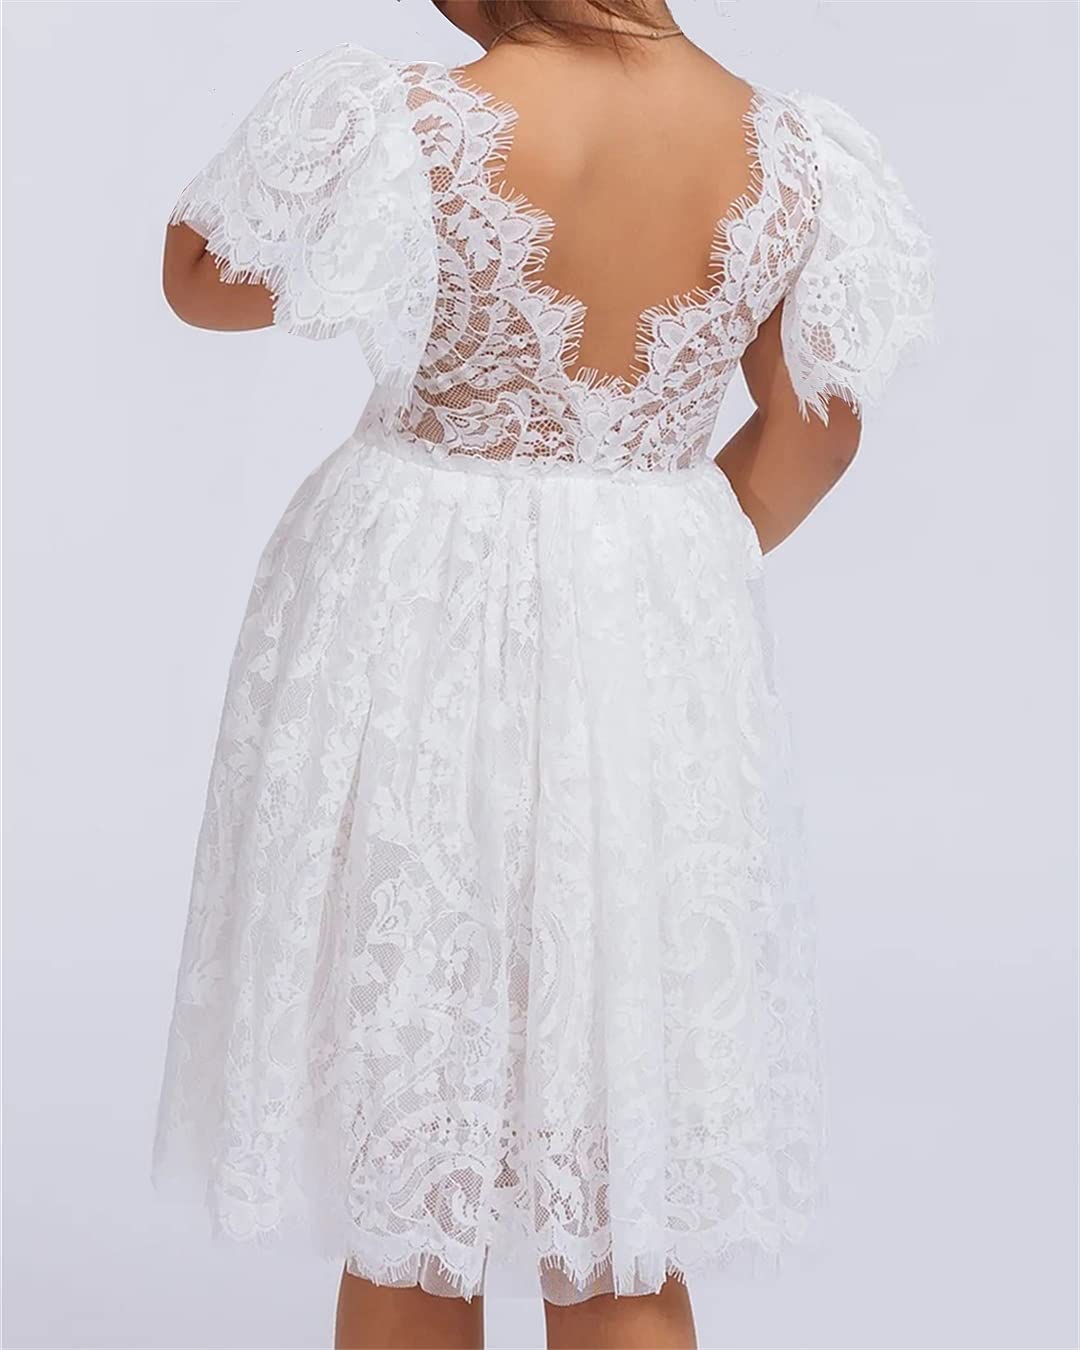 2Bunnies Flower Girl Dress Paisley Lace Back A-Line Flutter Sleeve Straight All Lace Knee (White) - 2BUNNIES